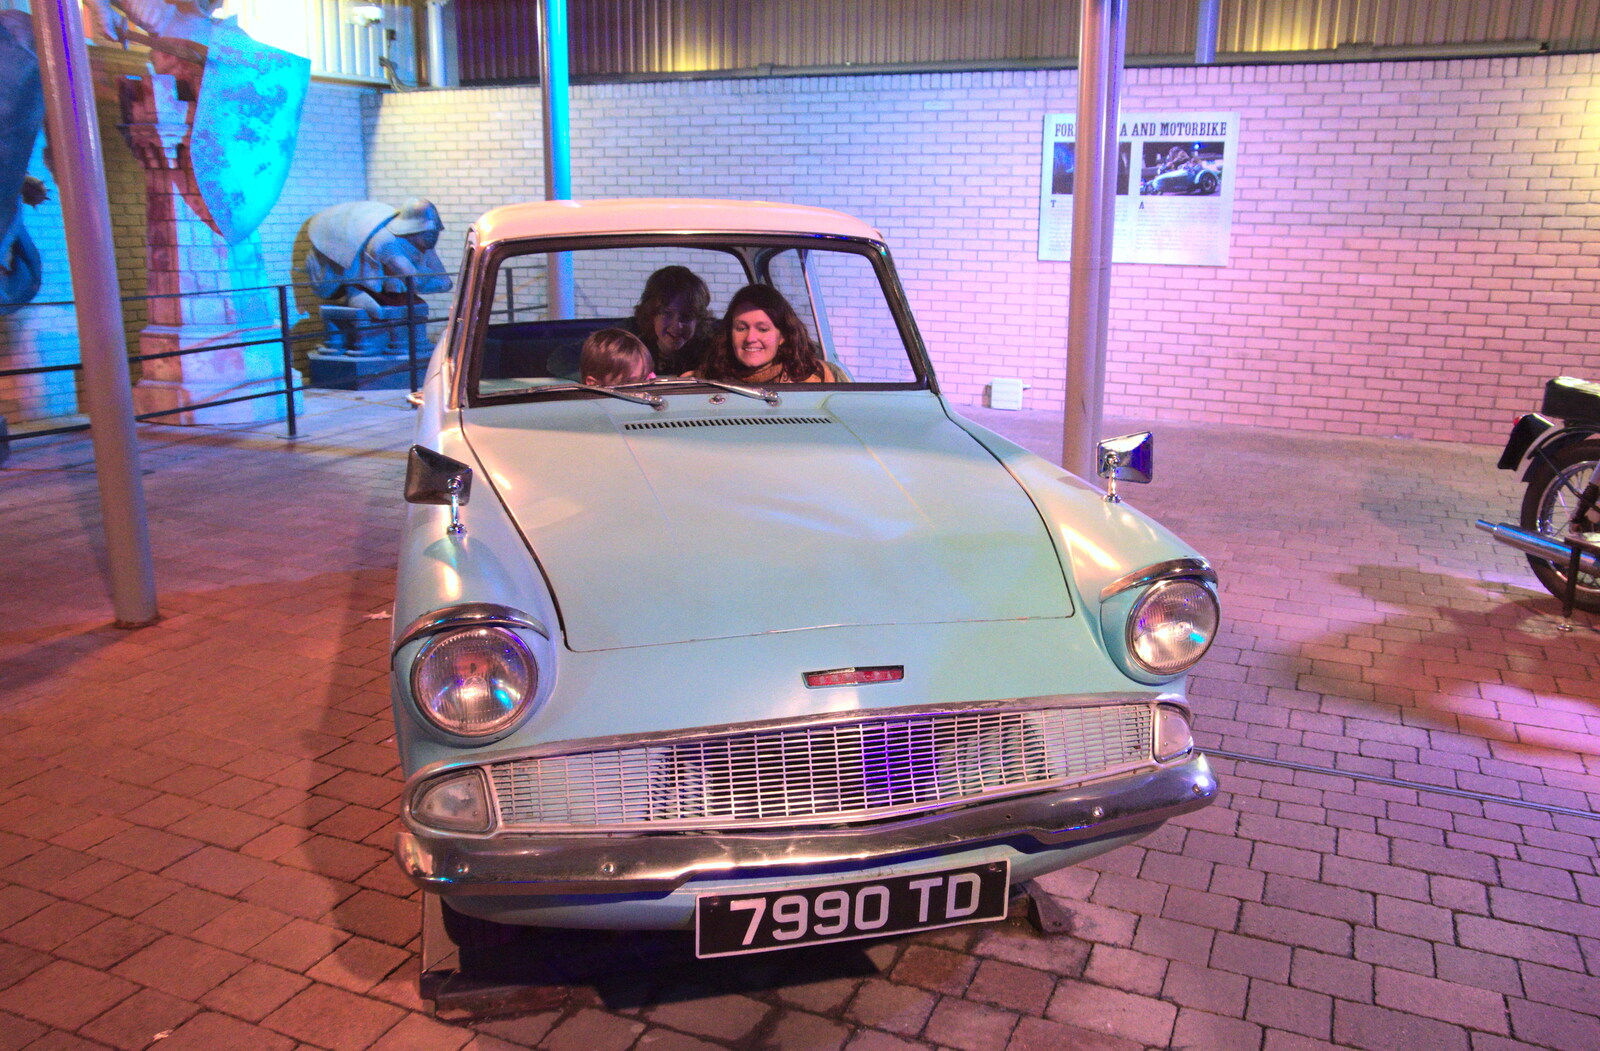 The gang in the Ford Anglia from A Trip to Harry Potter World, Leavesden, Hertfordshire - 16th February 2020